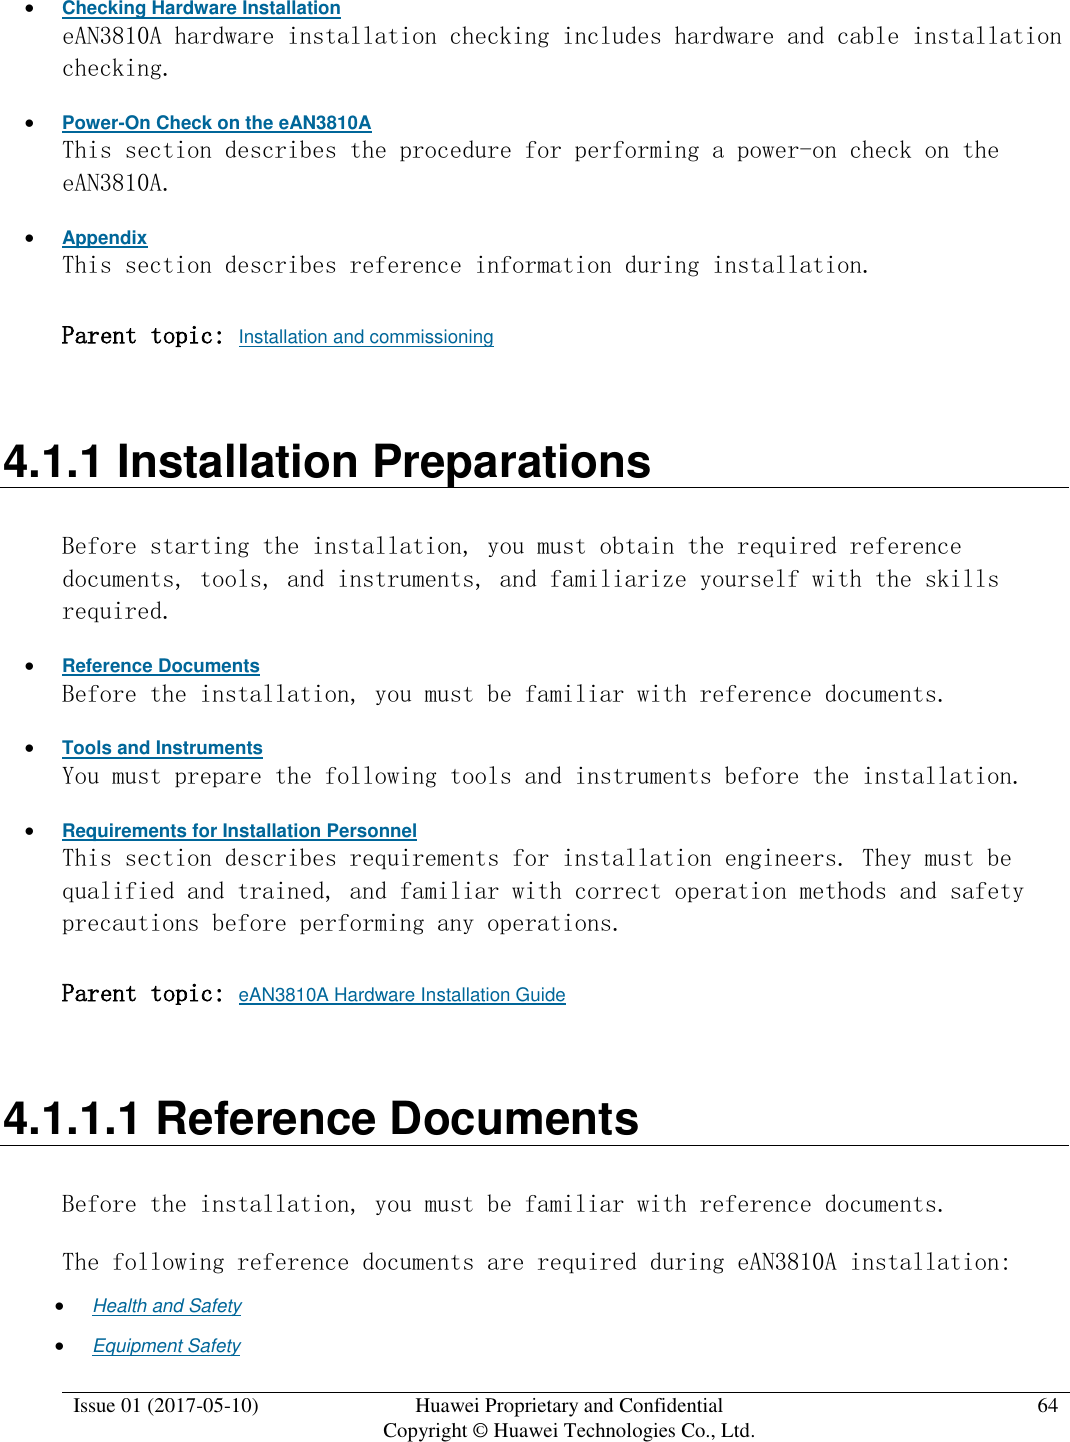  Issue 01 (2017-05-10) Huawei Proprietary and Confidential      Copyright © Huawei Technologies Co., Ltd. 64   Checking Hardware Installation eAN3810A hardware installation checking includes hardware and cable installation checking.   Power-On Check on the eAN3810A This section describes the procedure for performing a power-on check on the eAN3810A.  Appendix This section describes reference information during installation.  Parent topic: Installation and commissioning 4.1.1 Installation Preparations Before starting the installation, you must obtain the required reference documents, tools, and instruments, and familiarize yourself with the skills required.  Reference Documents Before the installation, you must be familiar with reference documents.  Tools and Instruments You must prepare the following tools and instruments before the installation.  Requirements for Installation Personnel This section describes requirements for installation engineers. They must be qualified and trained, and familiar with correct operation methods and safety precautions before performing any operations. Parent topic: eAN3810A Hardware Installation Guide 4.1.1.1 Reference Documents Before the installation, you must be familiar with reference documents. The following reference documents are required during eAN3810A installation:  Health and Safety  Equipment Safety 